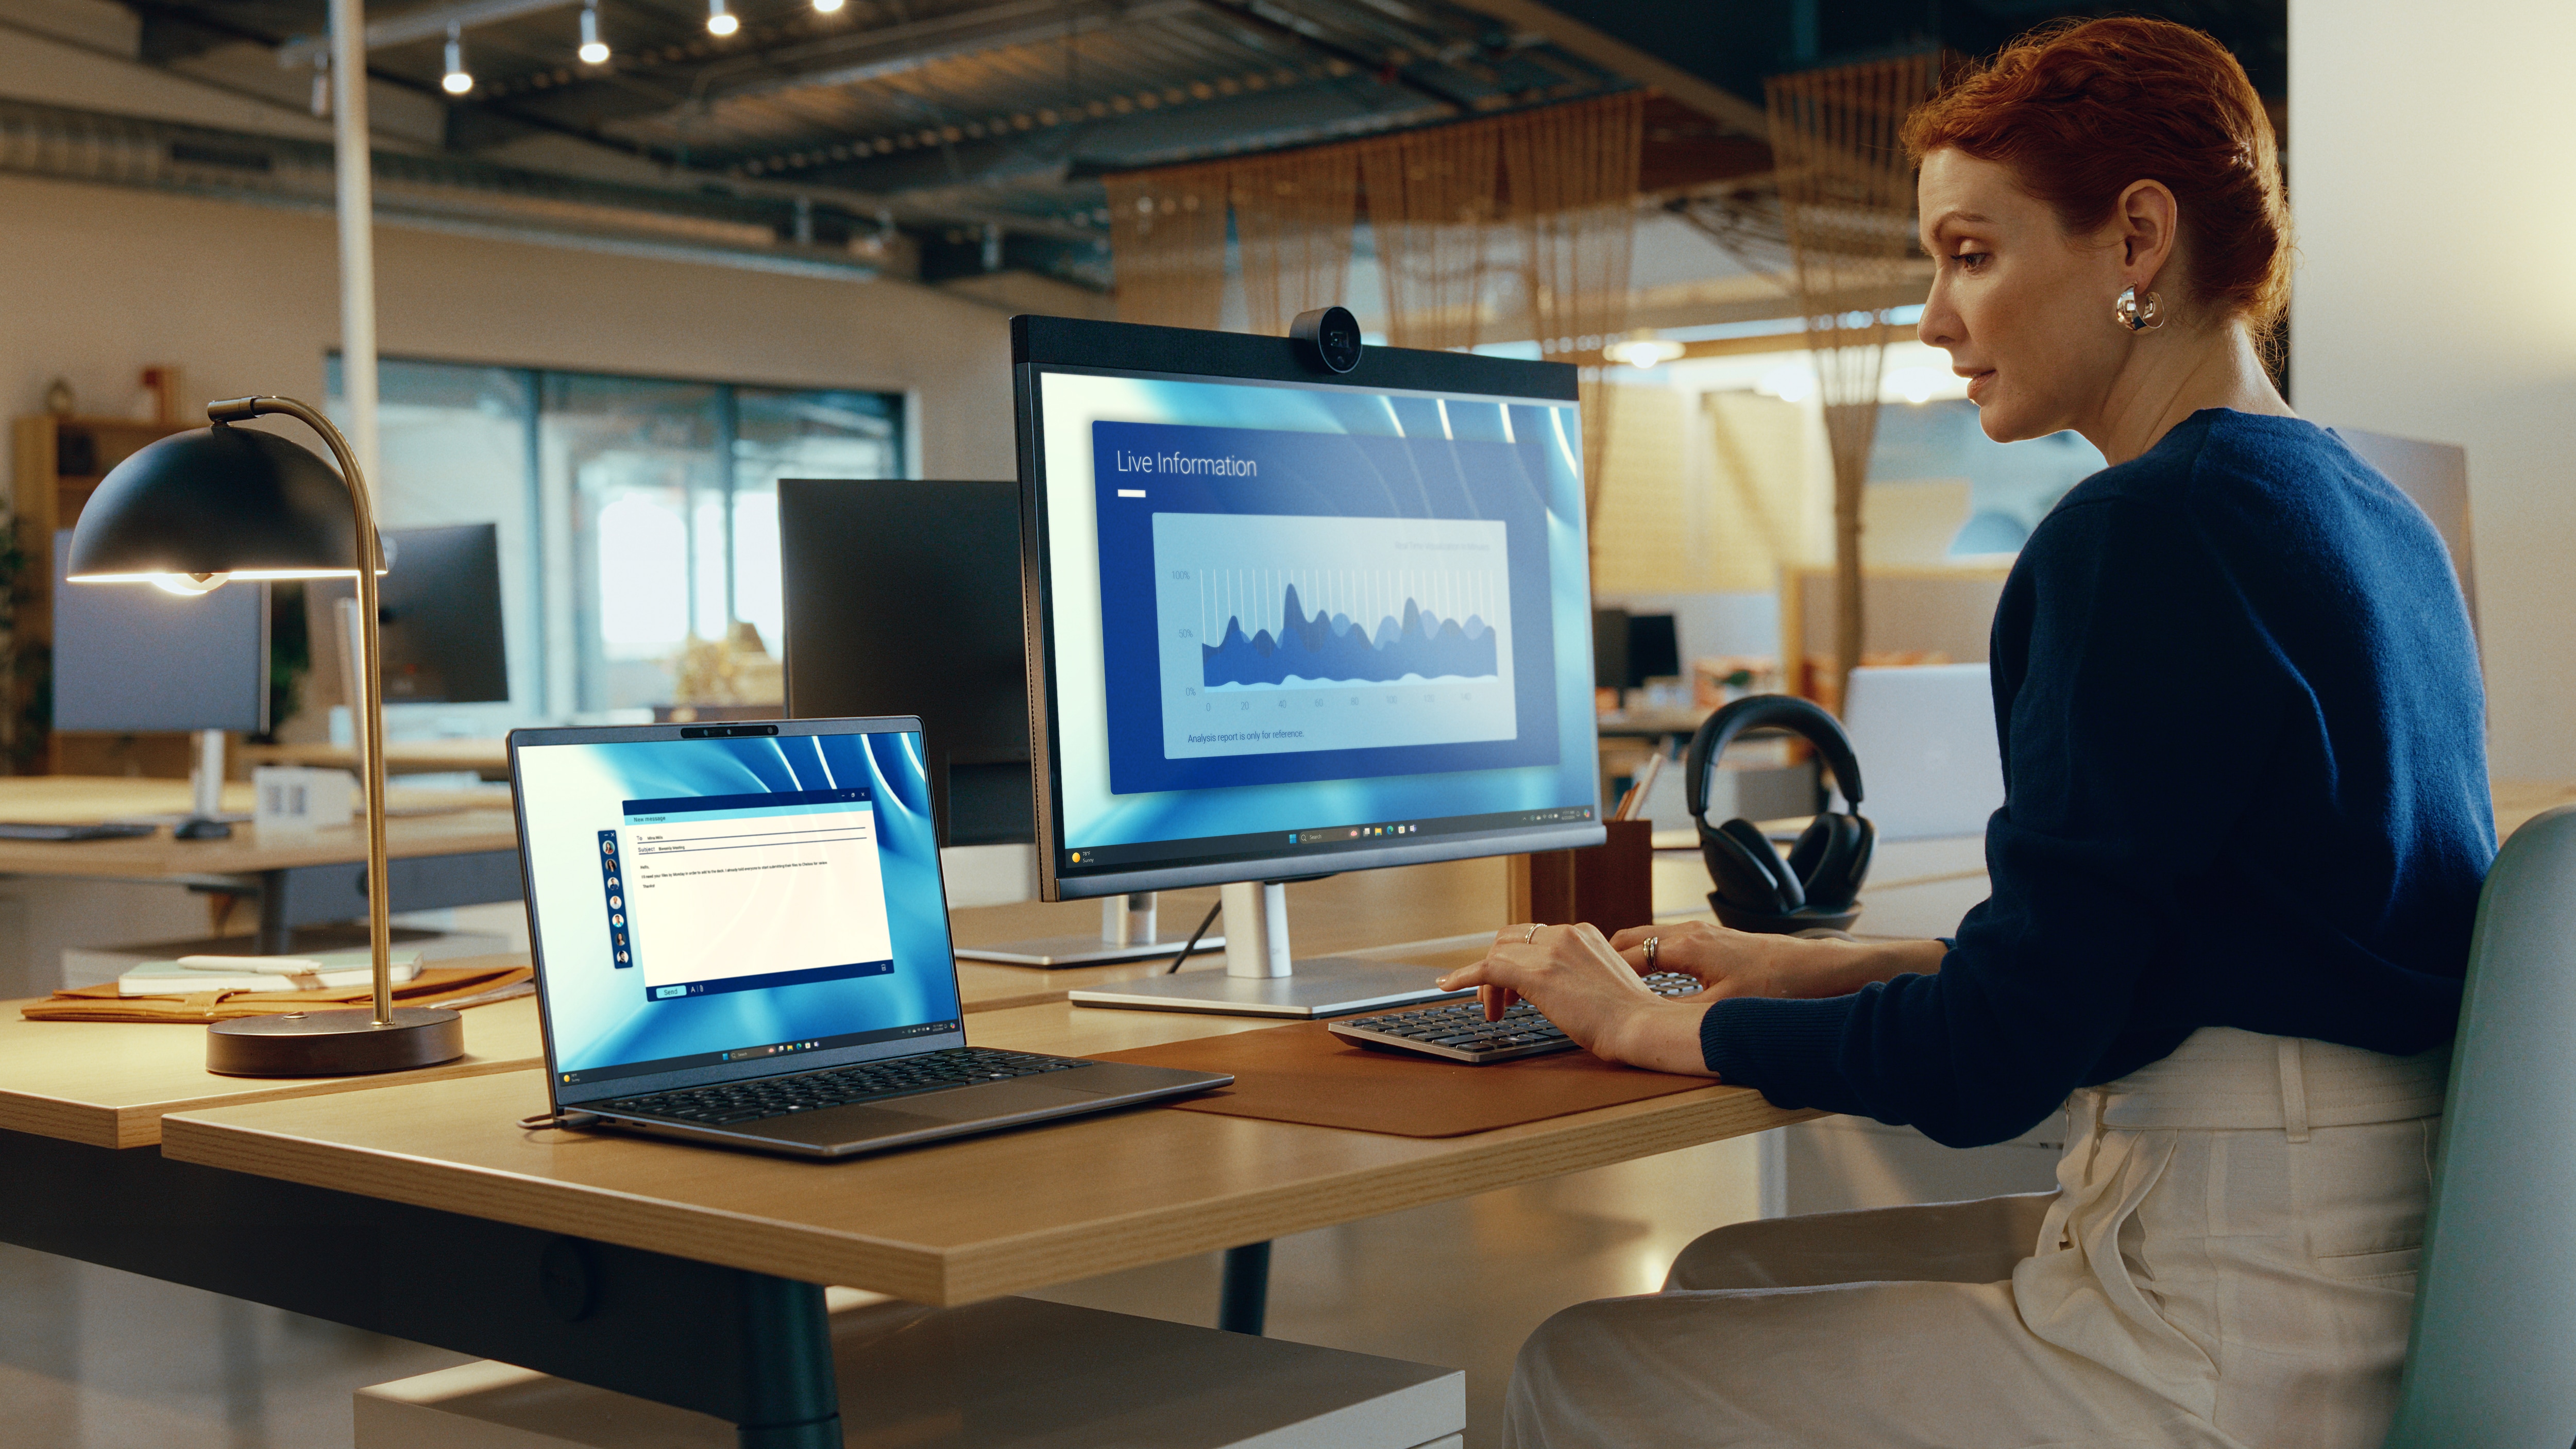 Latitude 7455 laptop connected to an ecosystem of Dell products in a workspace.